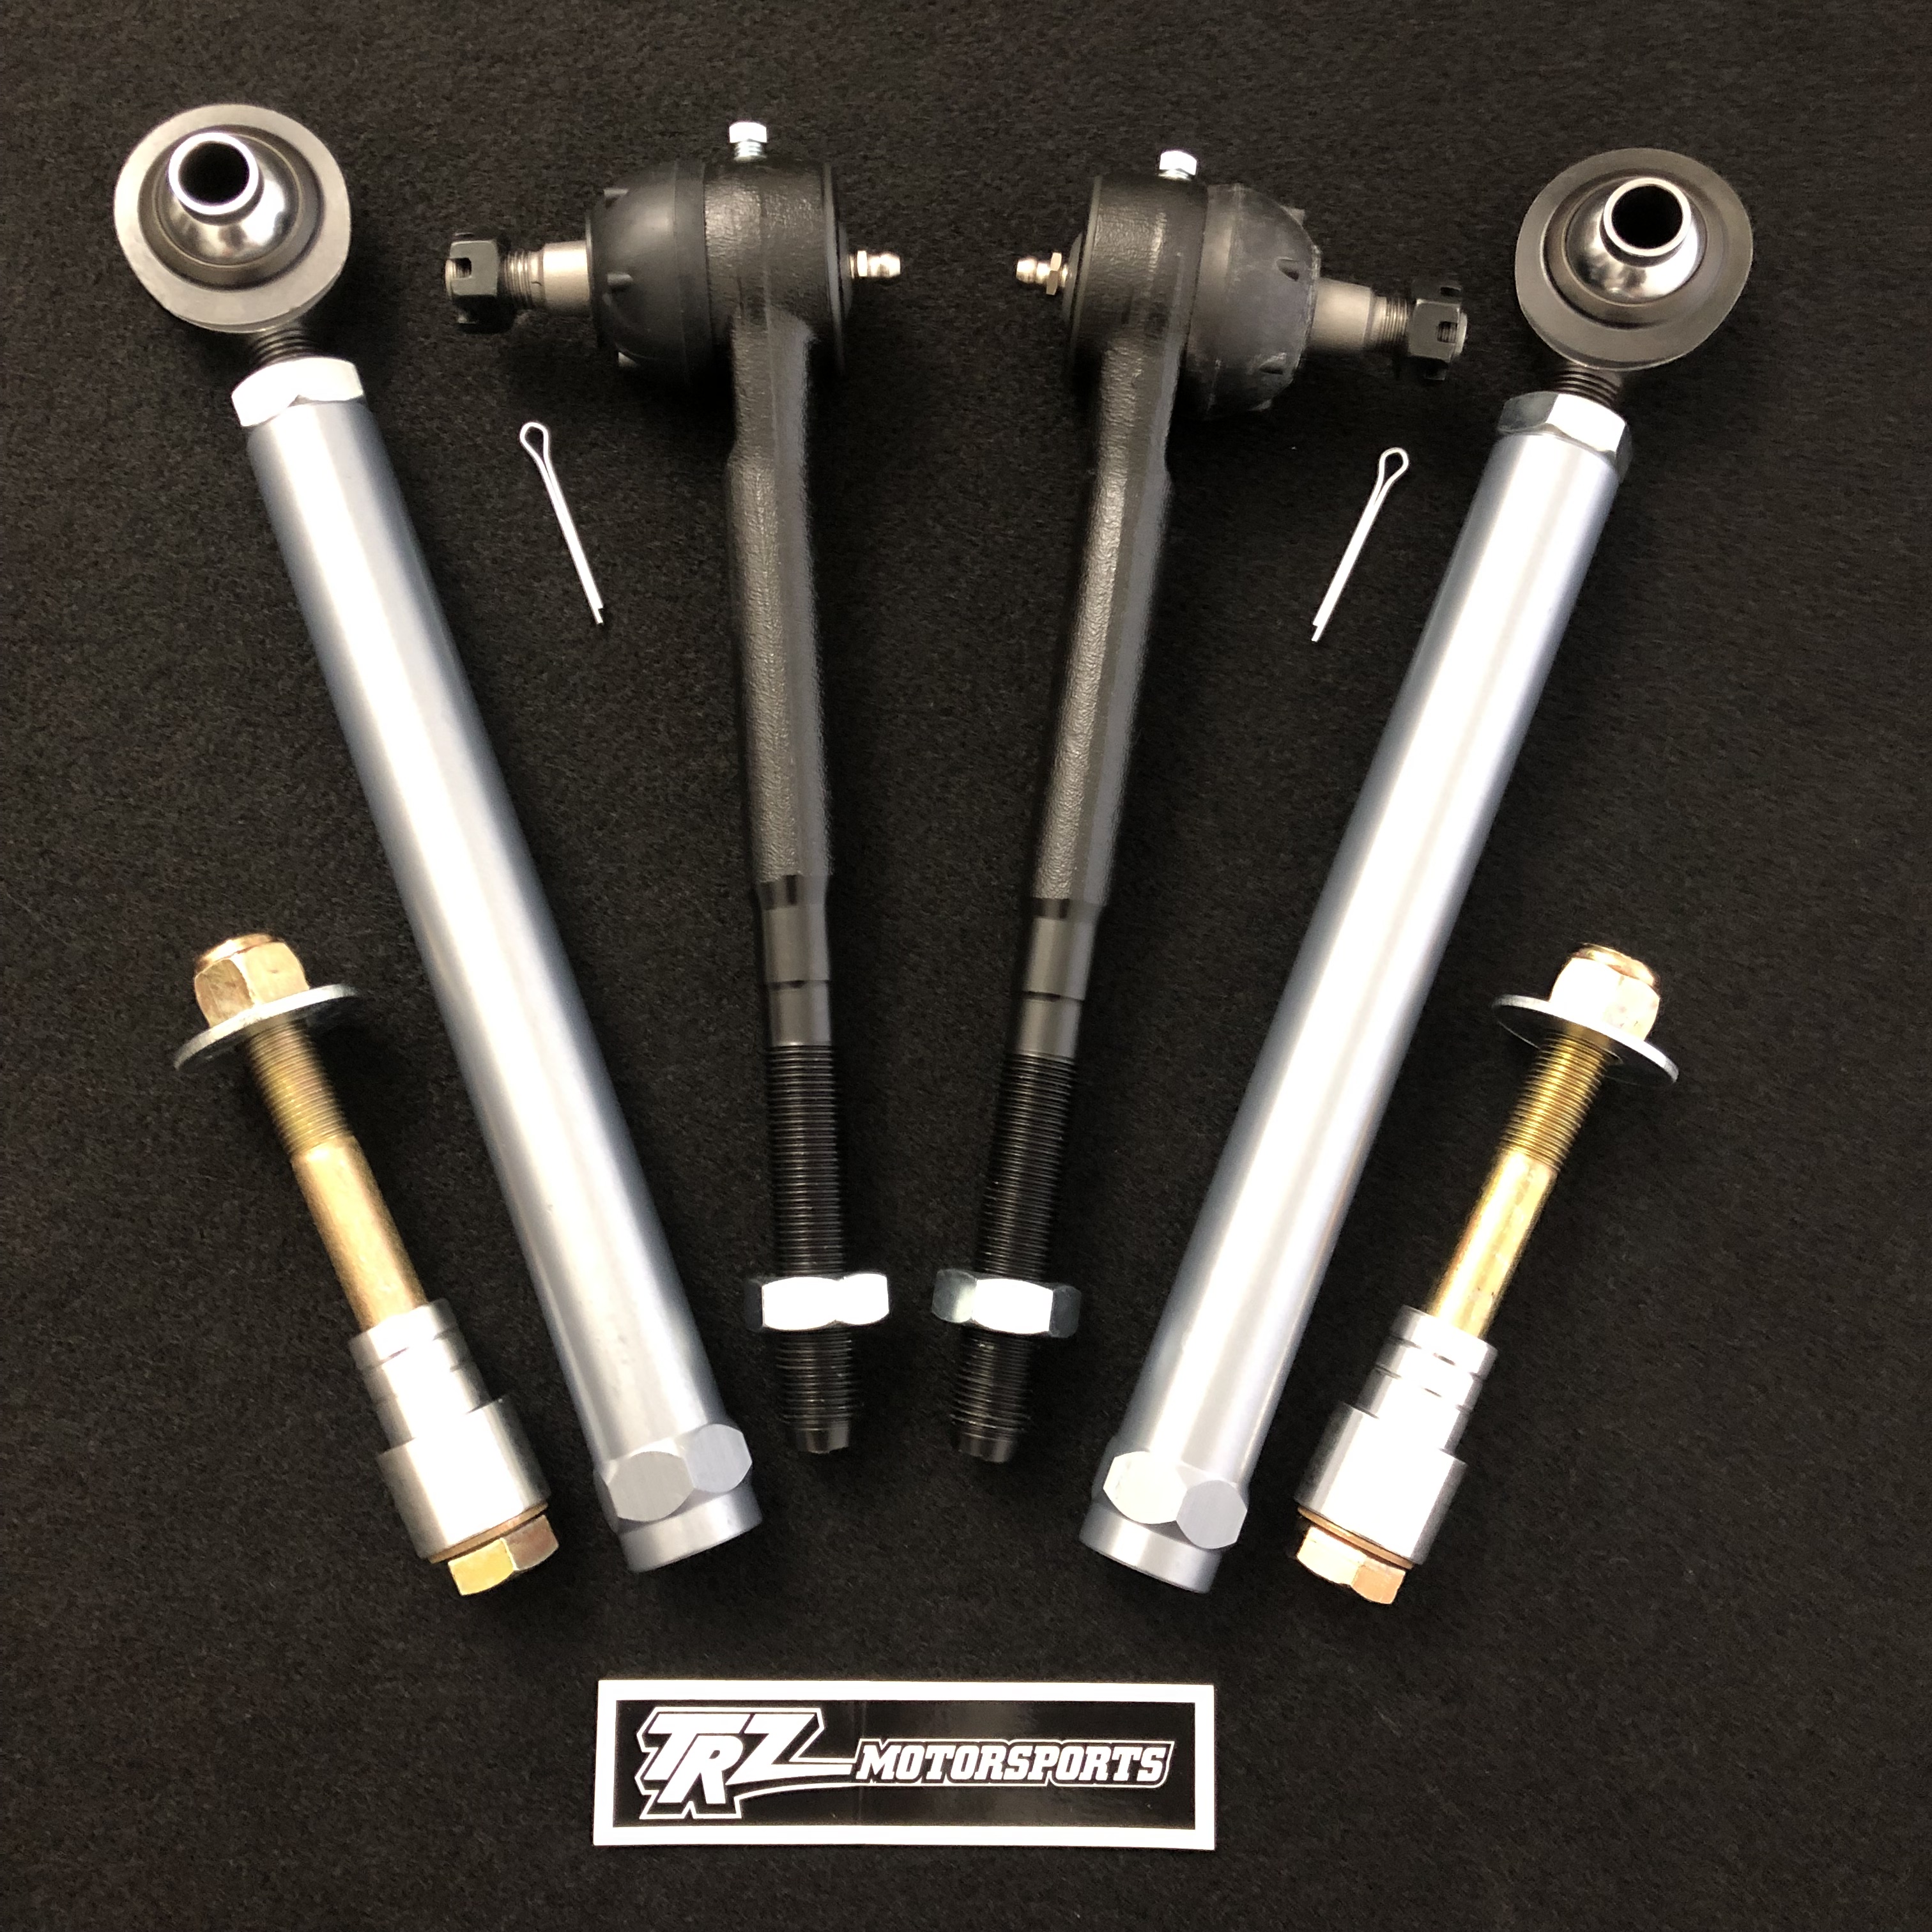 Bump Steer Kit for use with Stock Steering (G-Body) – TRZ Motorsports